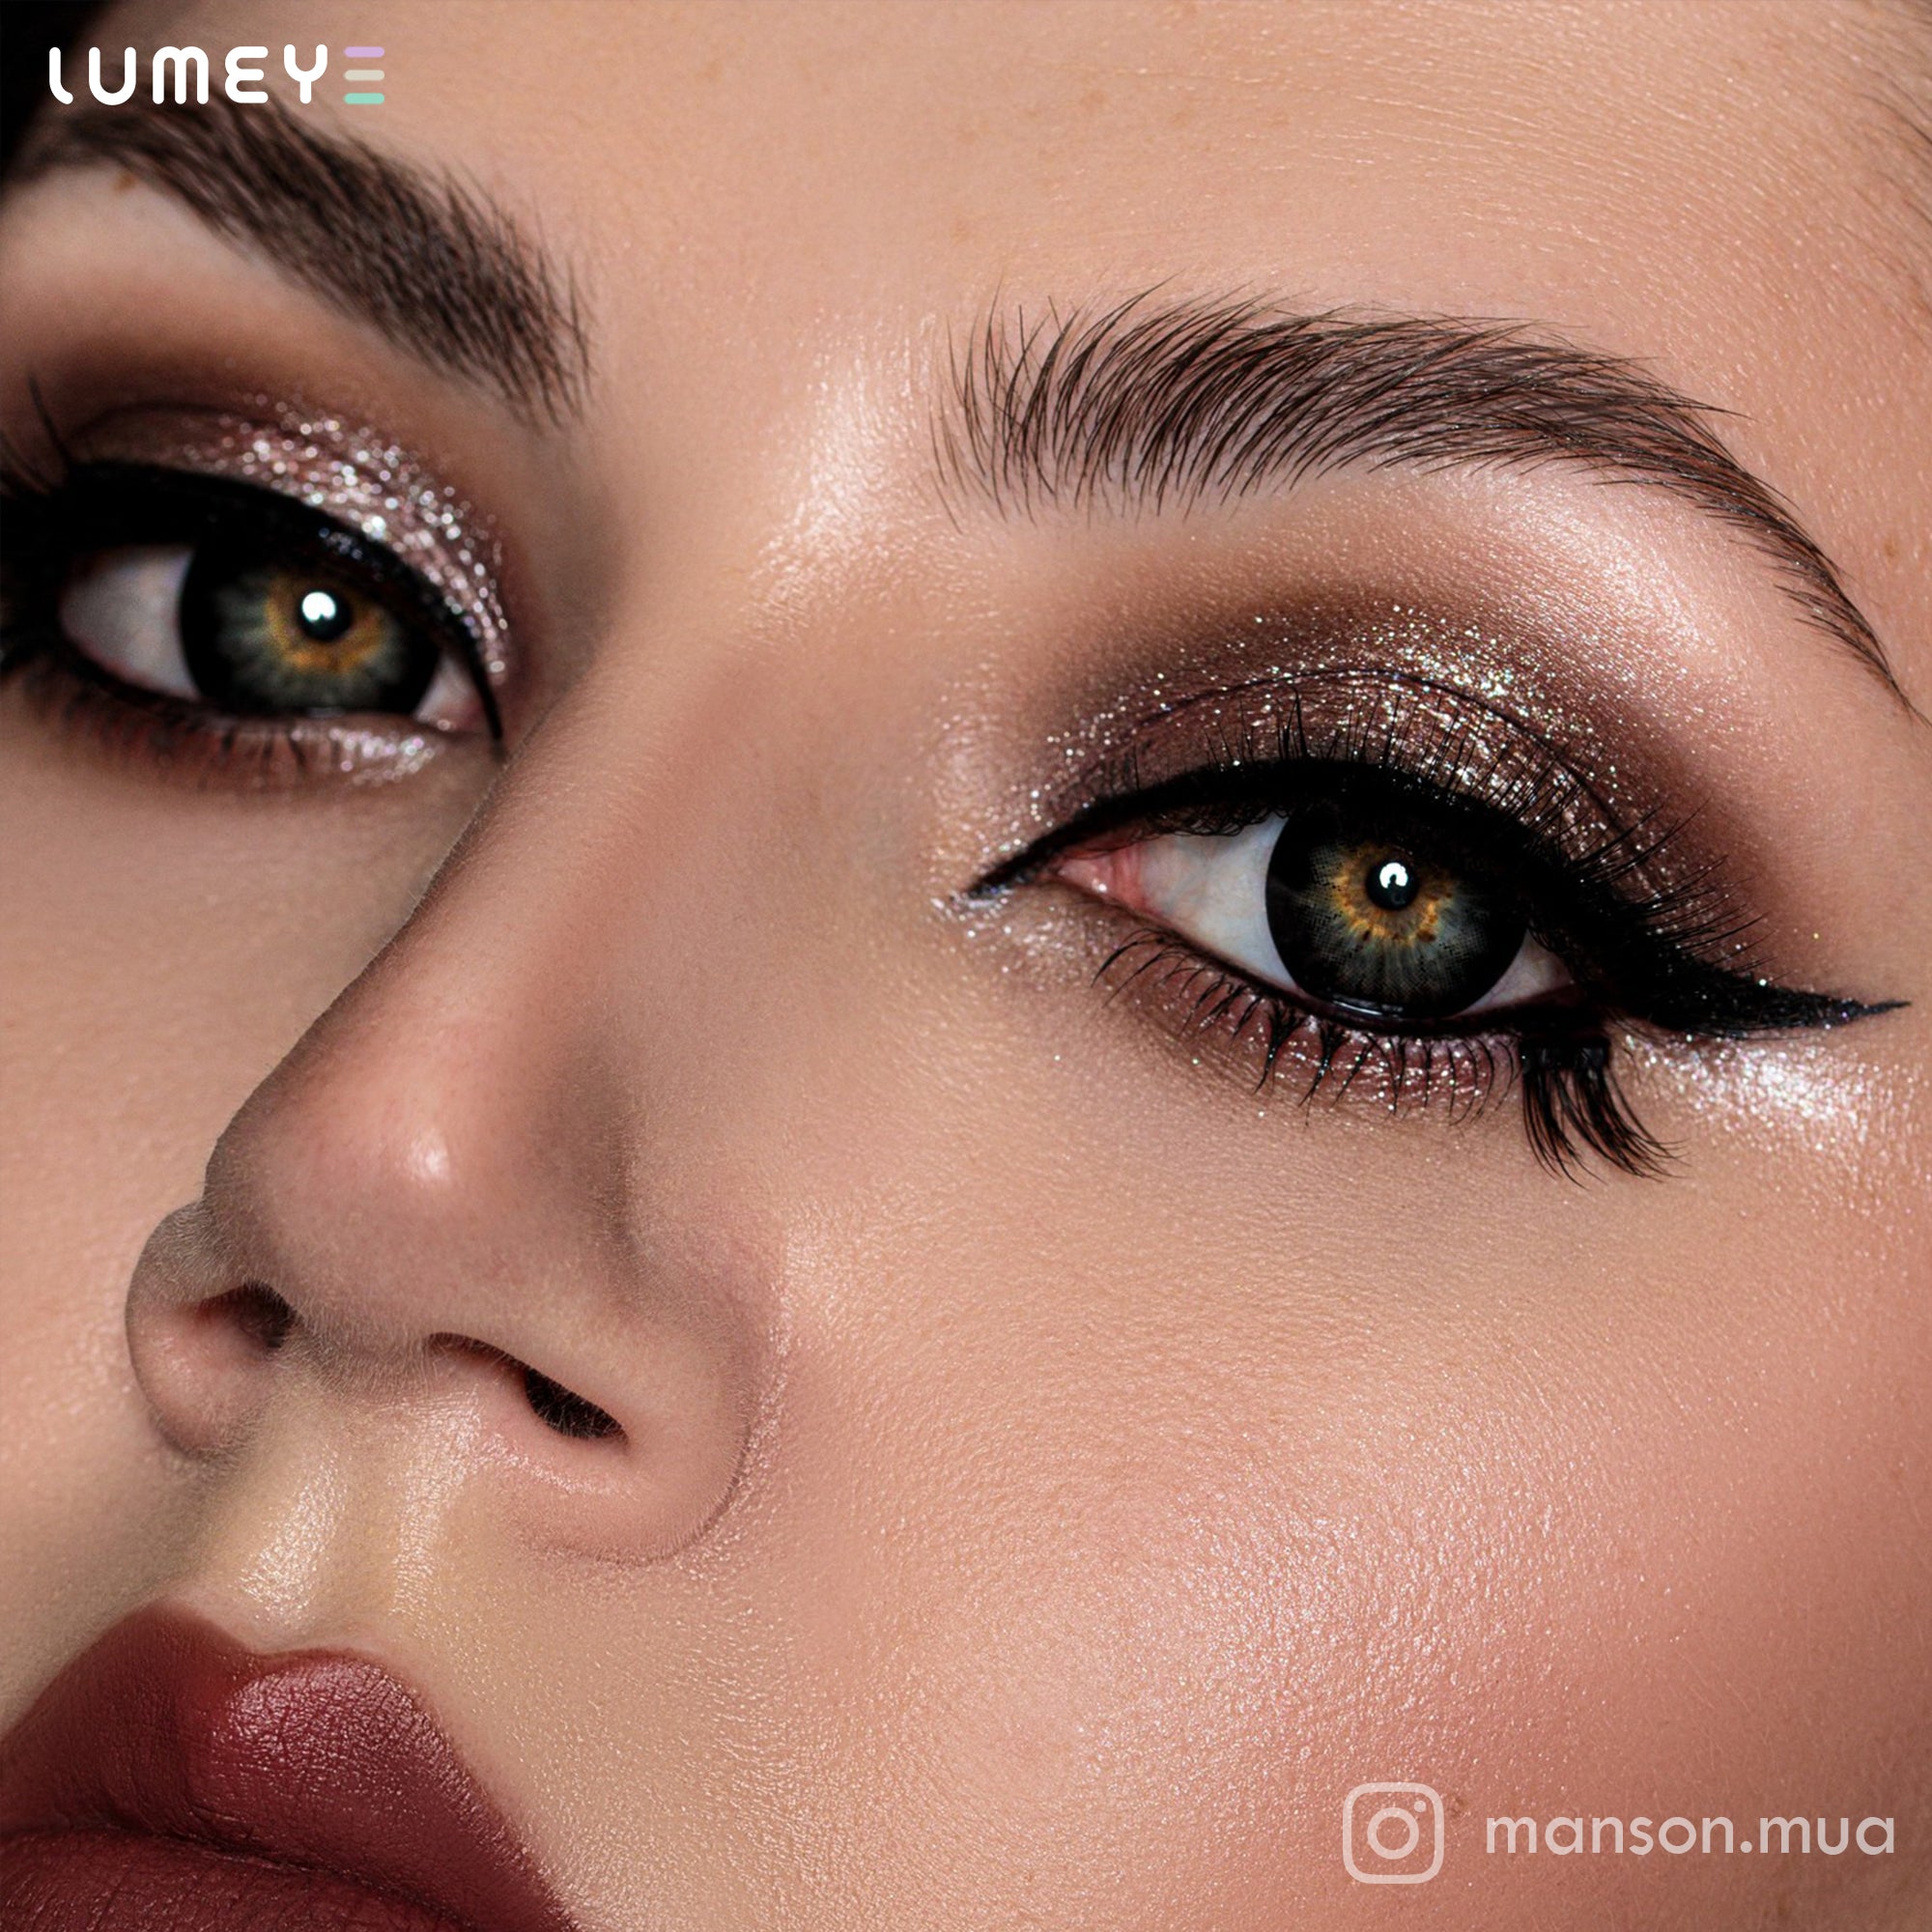 Best COLORED CONTACTS - LUMEYE Dahlia Black Colored Contact Lenses - LUMEYE